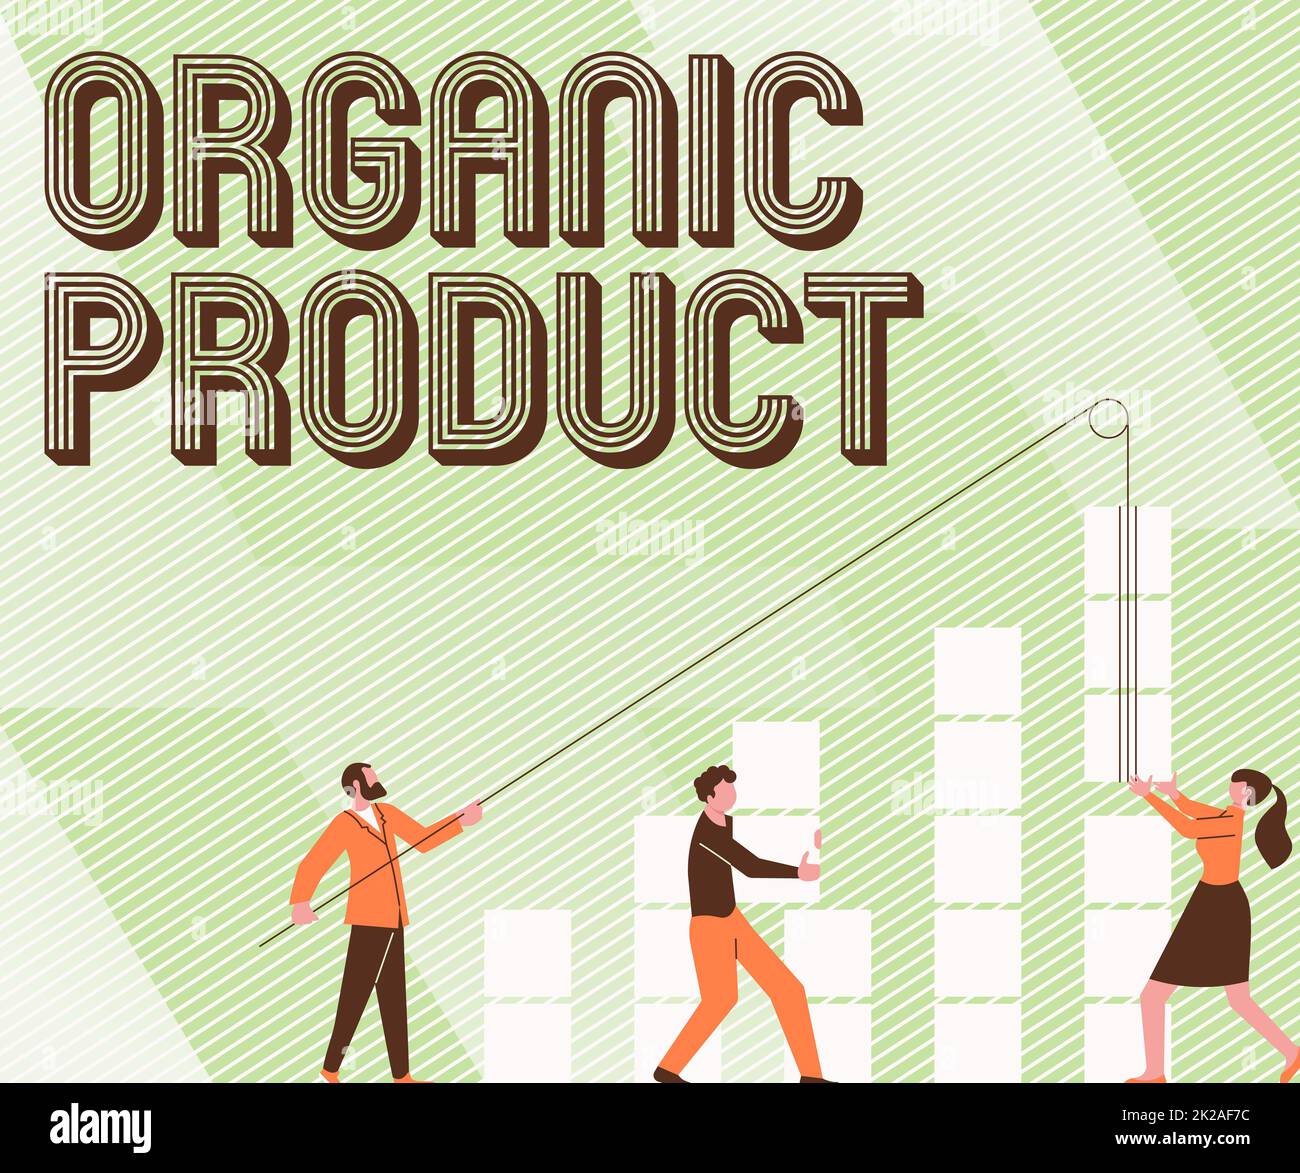 Conceptual caption Organic Product. Concept meaning made from materials produced by organic agriculture Illustration Of Partners Building New Wonderful Ideas For Skills Improvement. Stock Photo